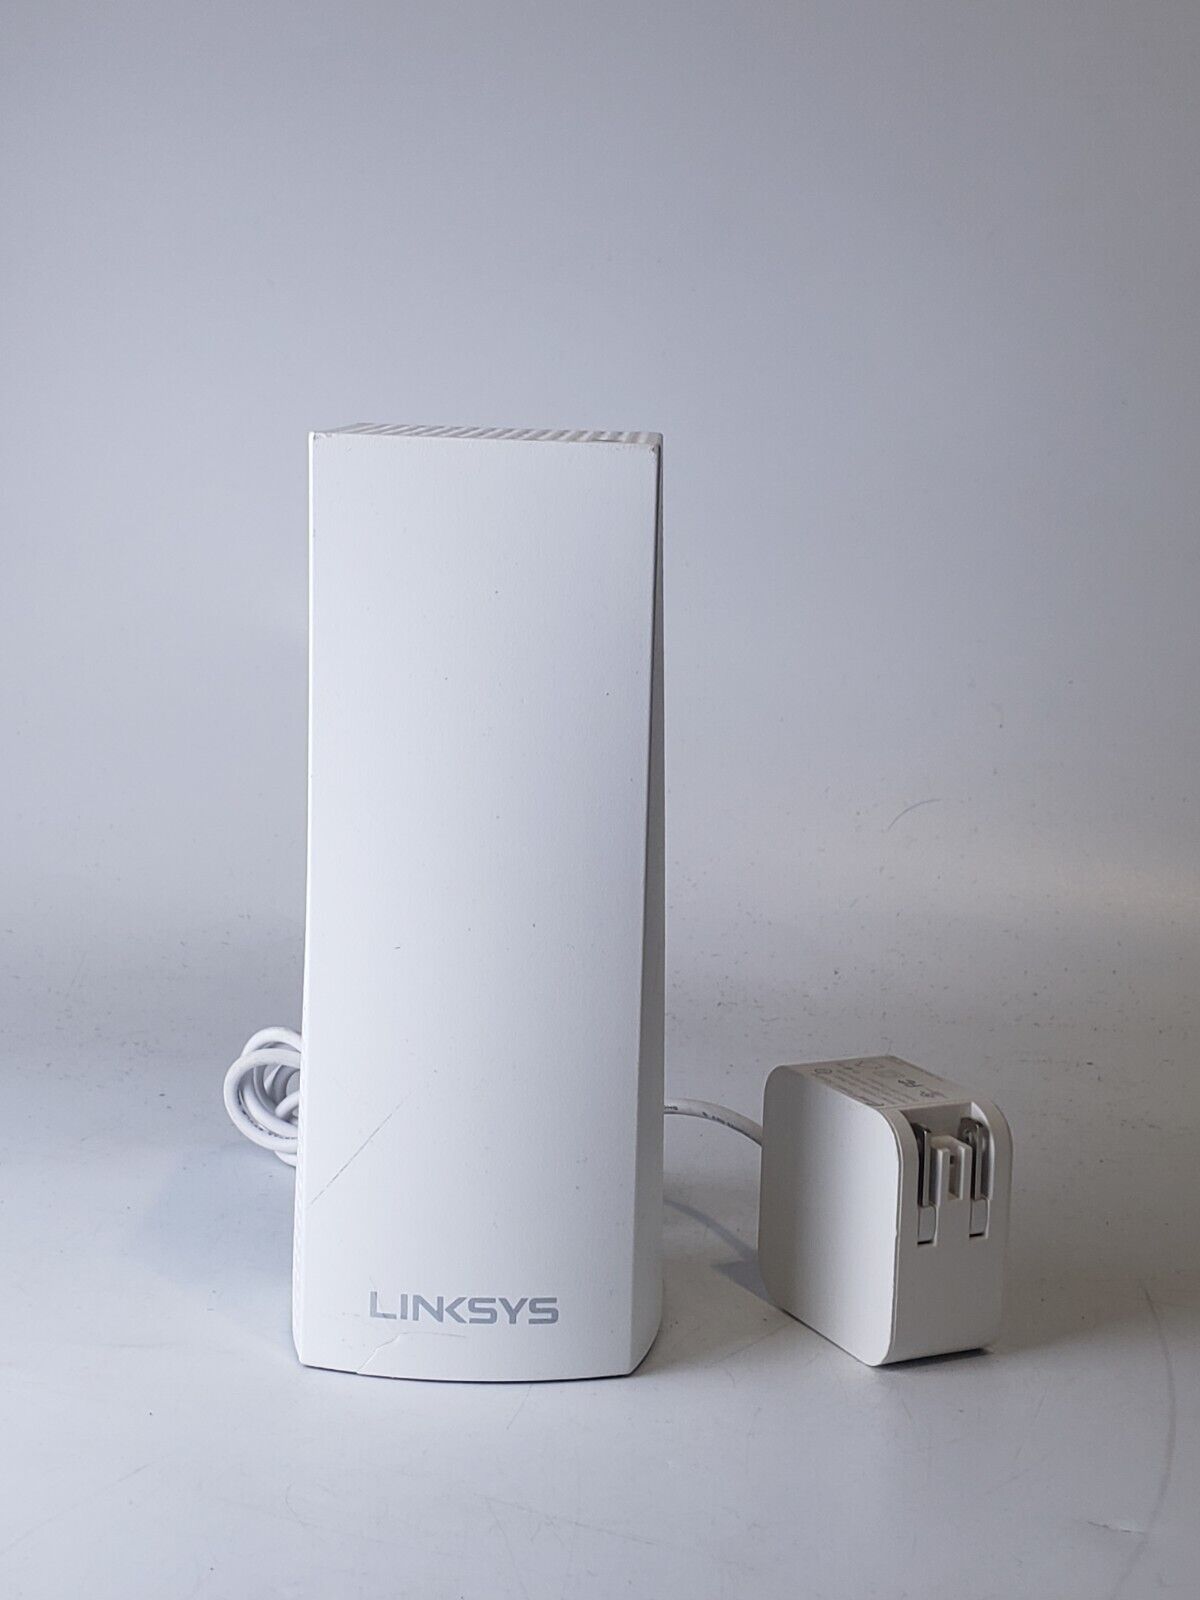 Linksys Velop WHW03 A03 v2 Tri-Band Whole Home Wi-Fi System with AC Cord